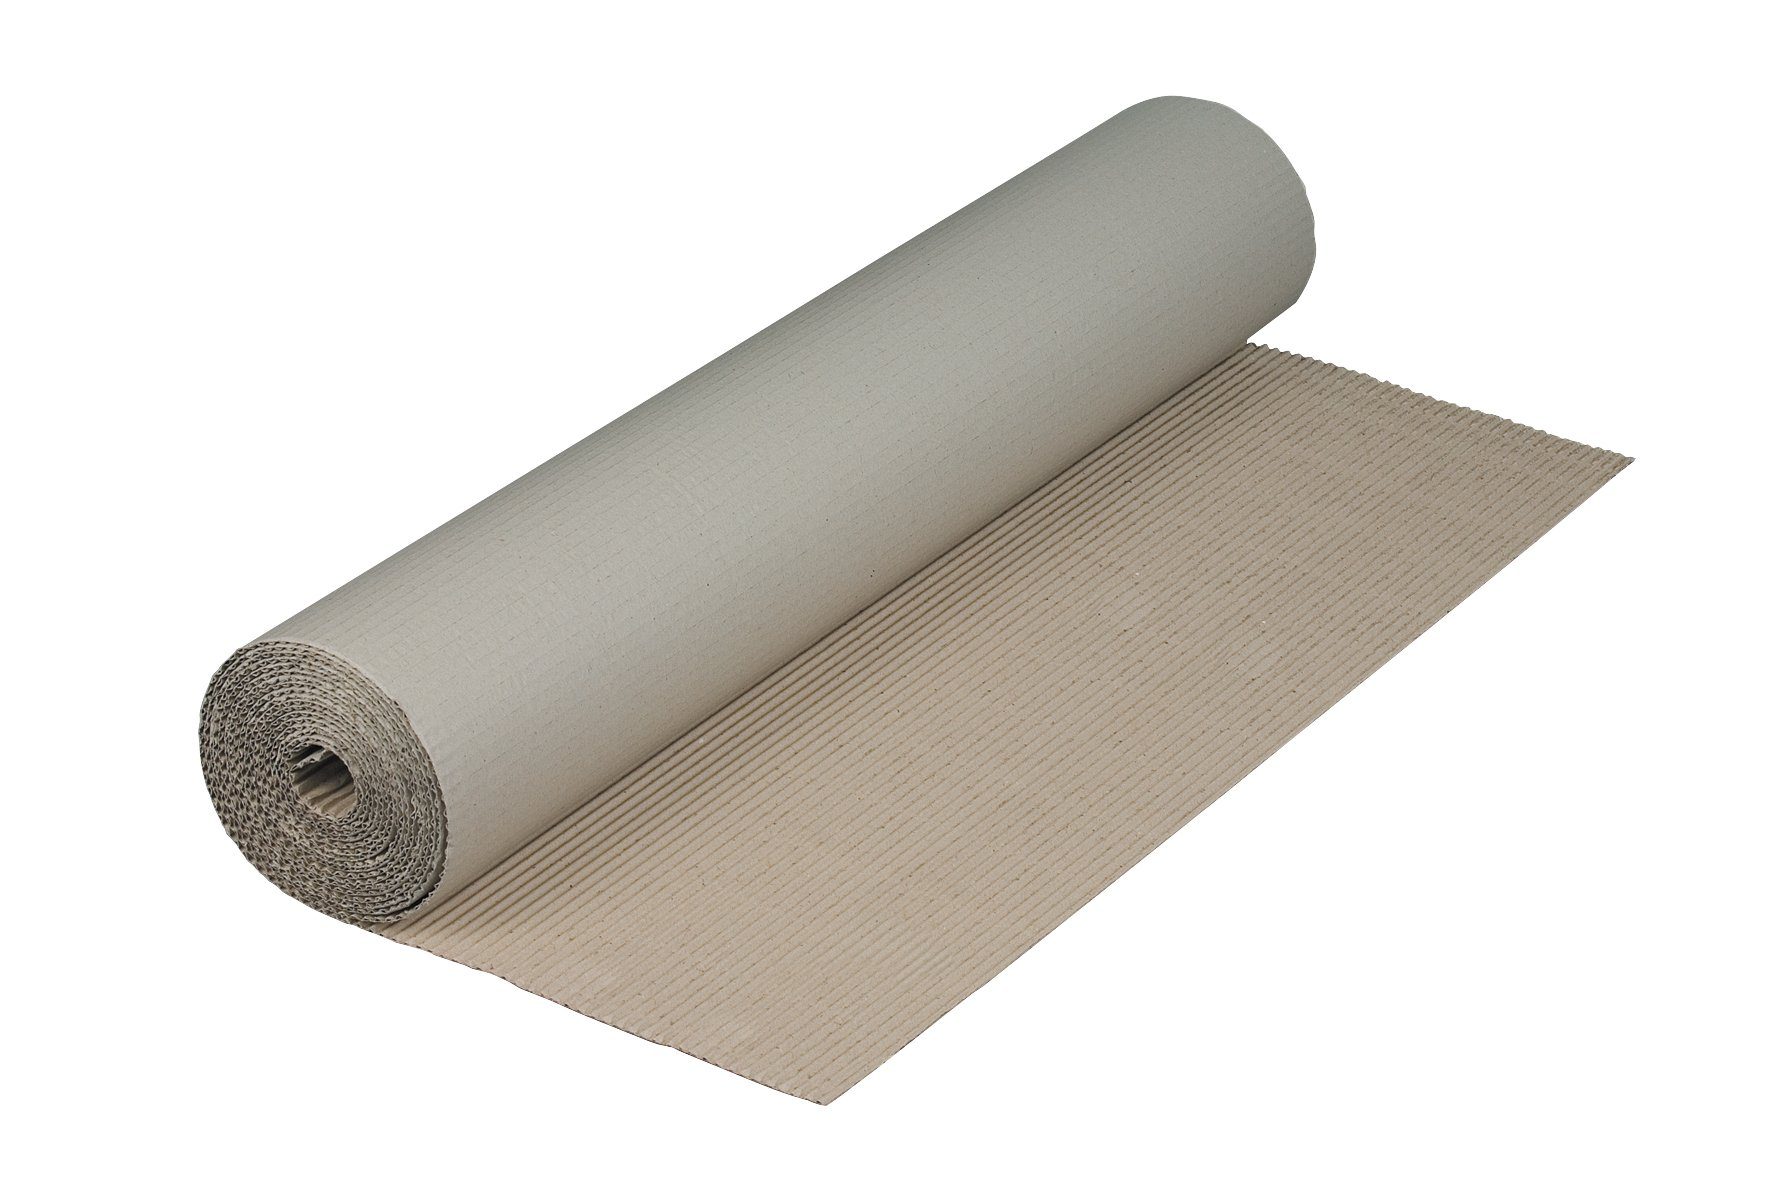 NIPS Packpapier ROLLEN-WELLPAPPE 70 cm x 5 m Polstermaterial, Recycling-Wellpappe